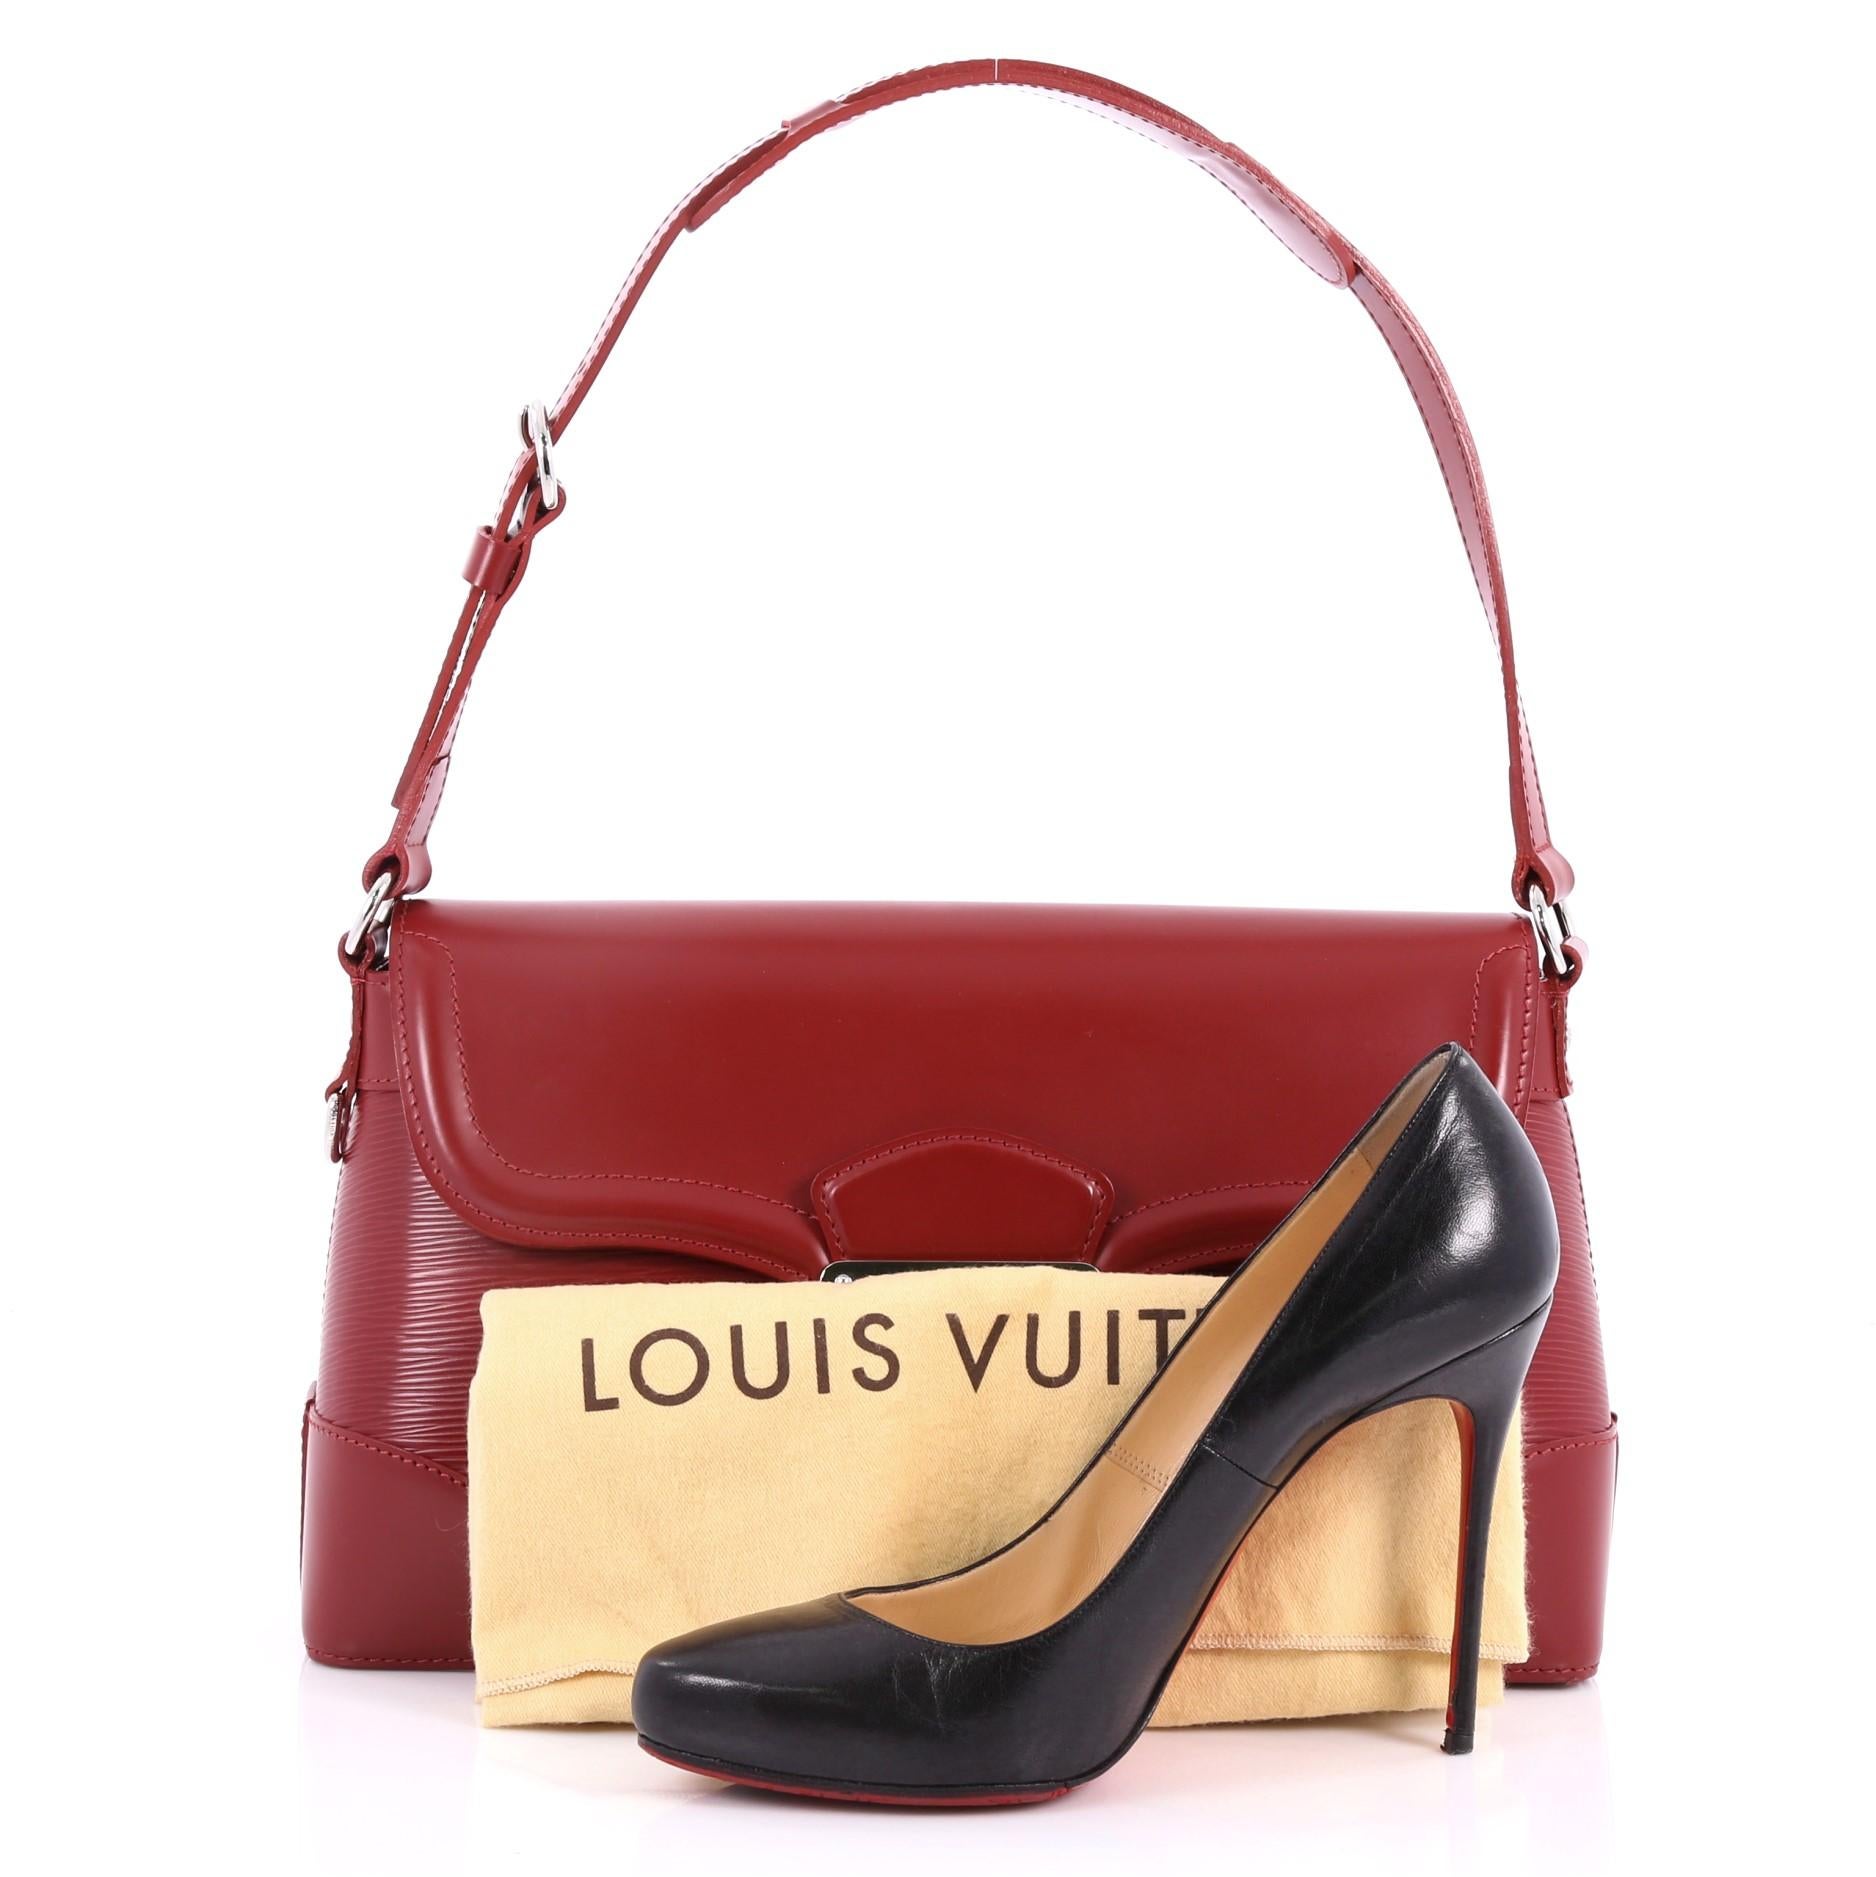 This authentic Louis Vuitton Bagatelle Shoulder Bag Epi Leather PM is classic and elegant perfect for everyday use. Crafted in red epi leather, this shoulder bag features an adjustable shoulder strap, frontal flap and silver-tone hardware accents.